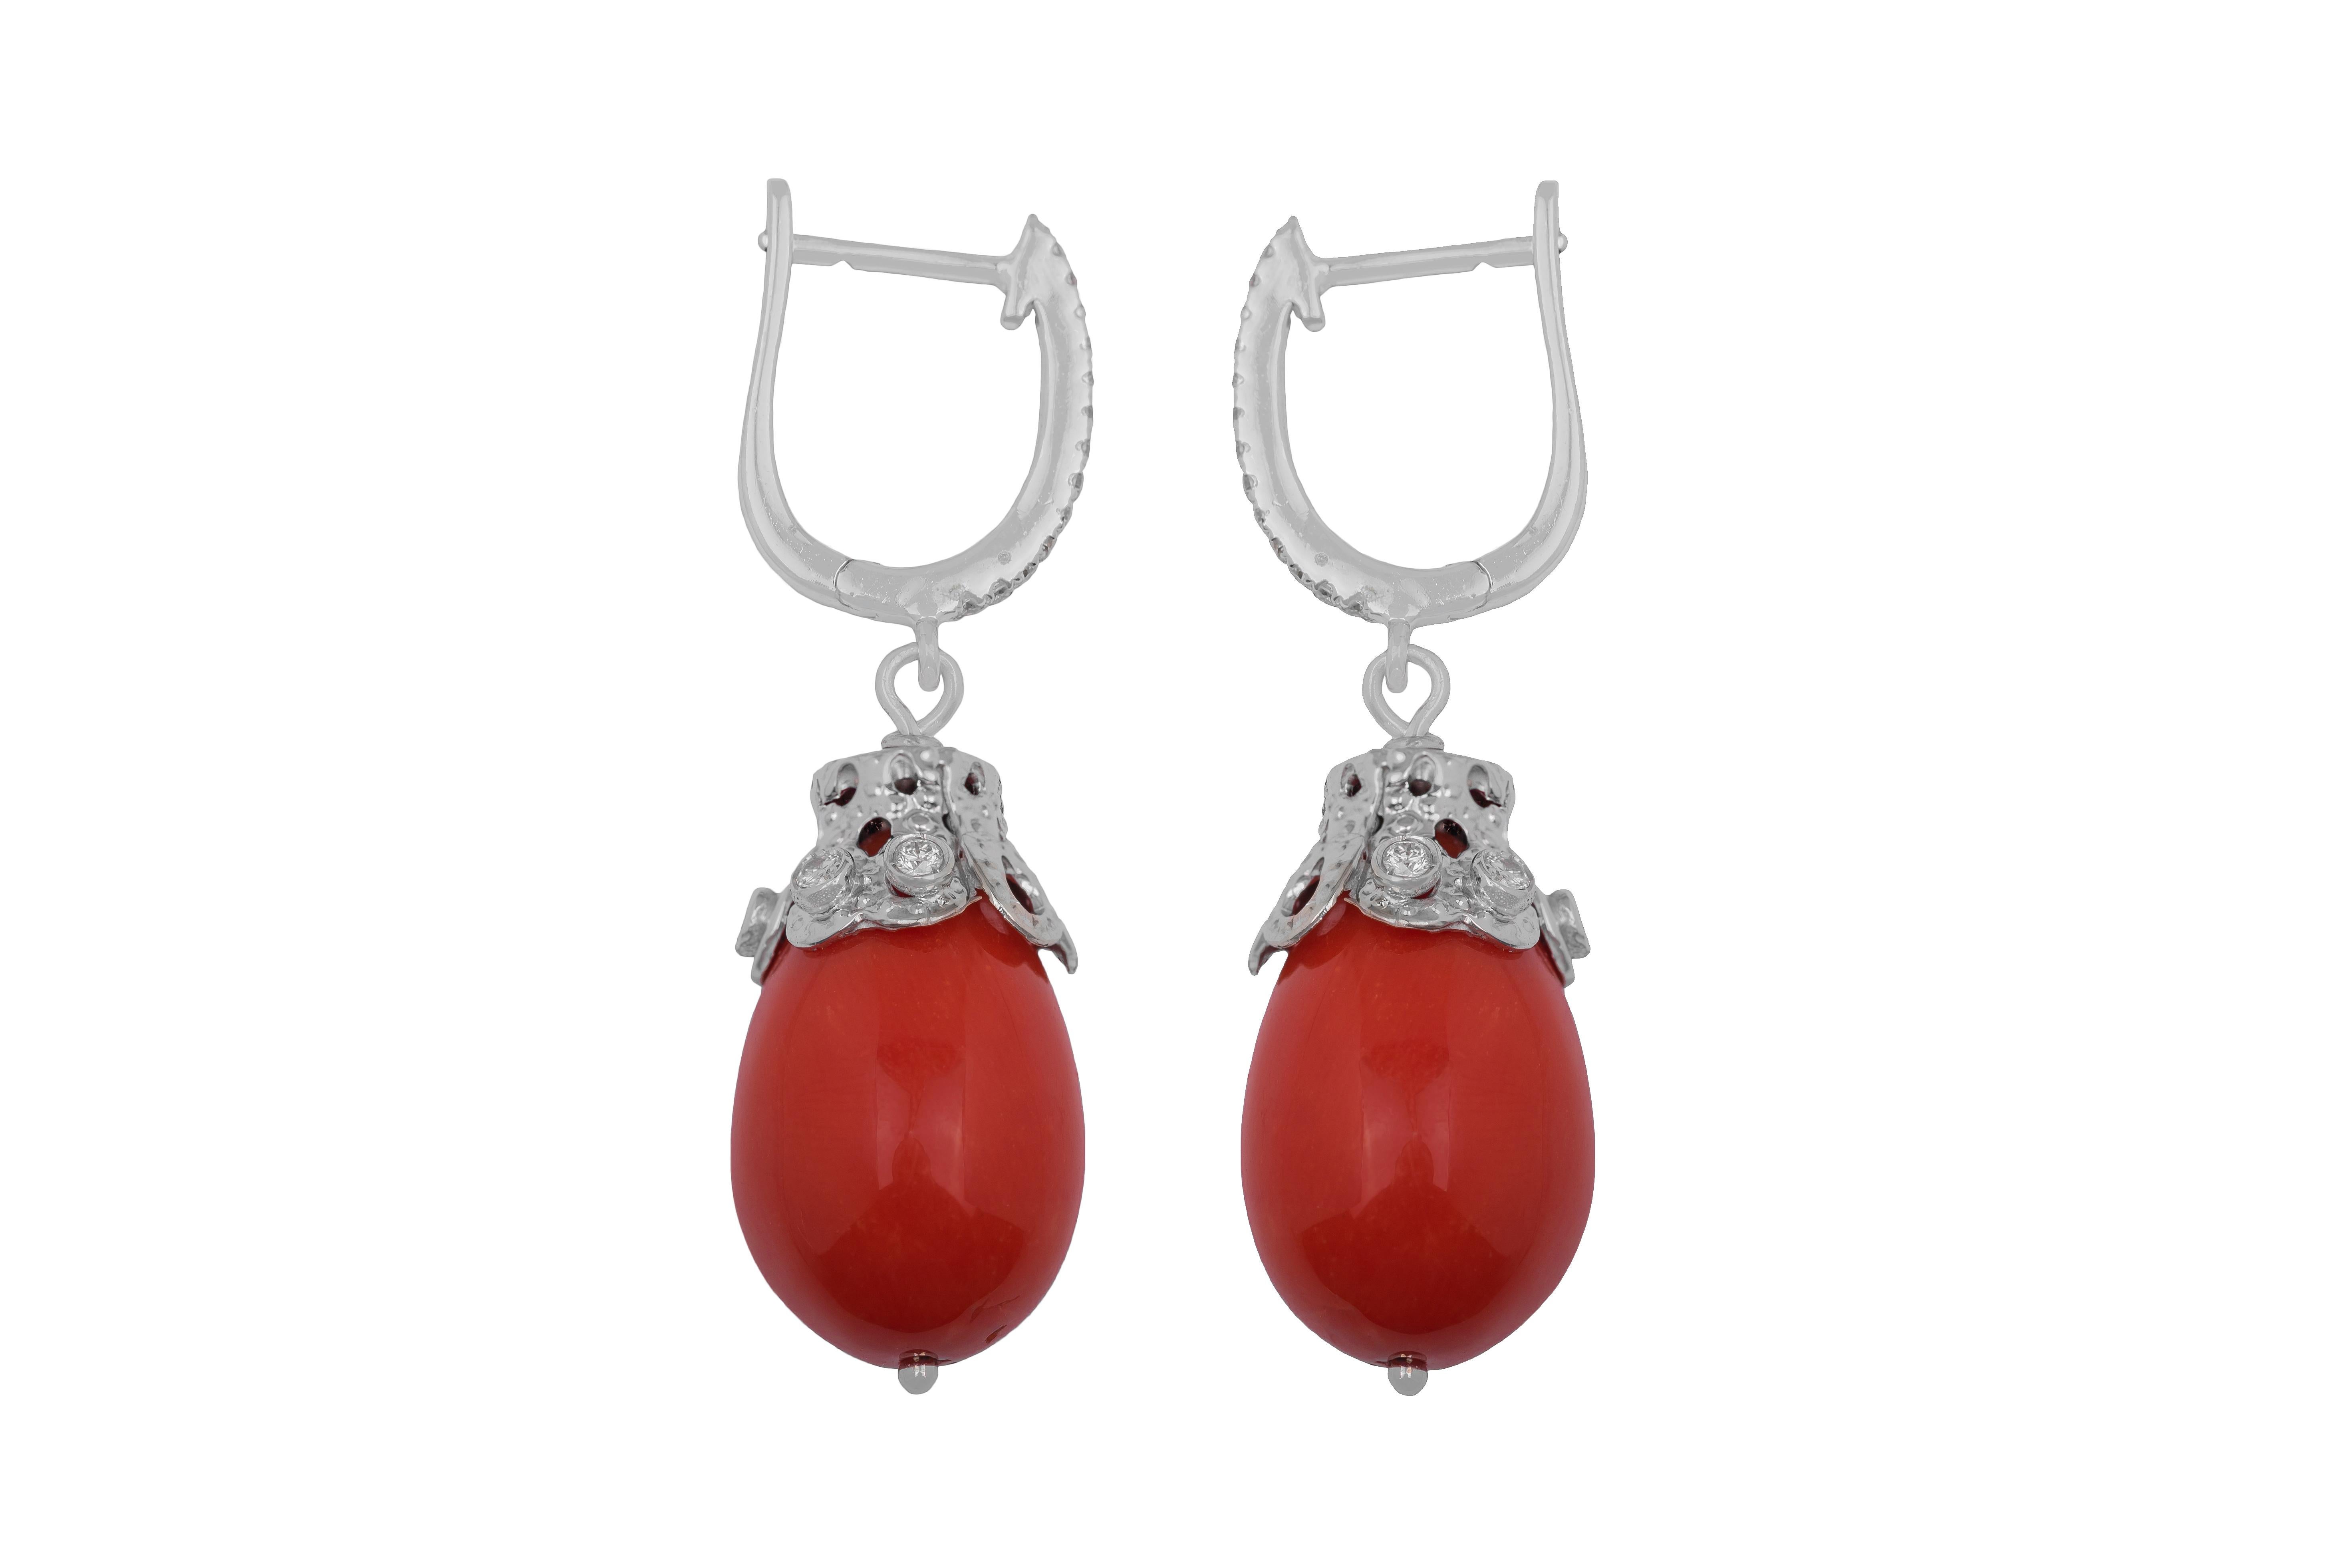 Brilliant Cut Coral Diamonds and 18k White Gold Earrings